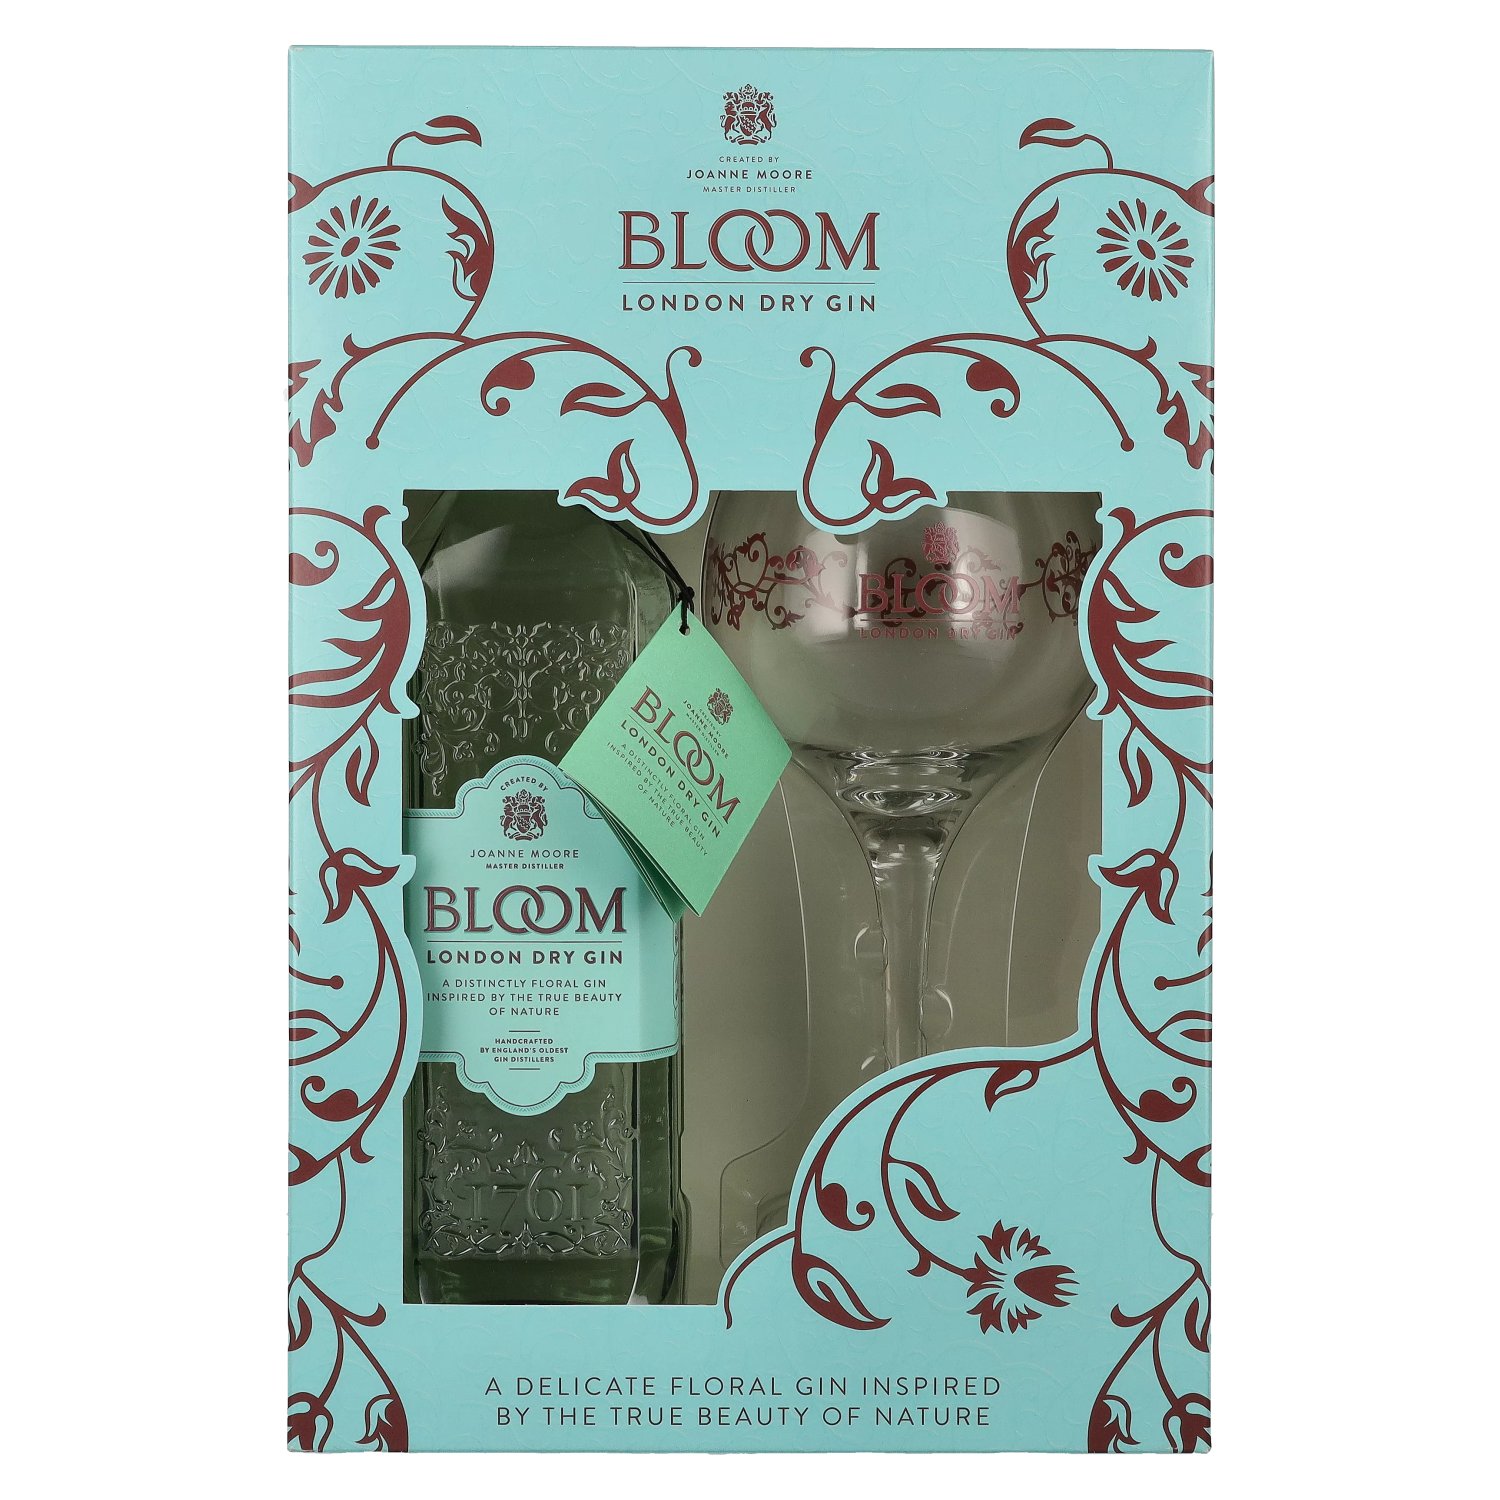 Bloom London Dry Giftbox 40% with Vol. in Gin 0,7l glass